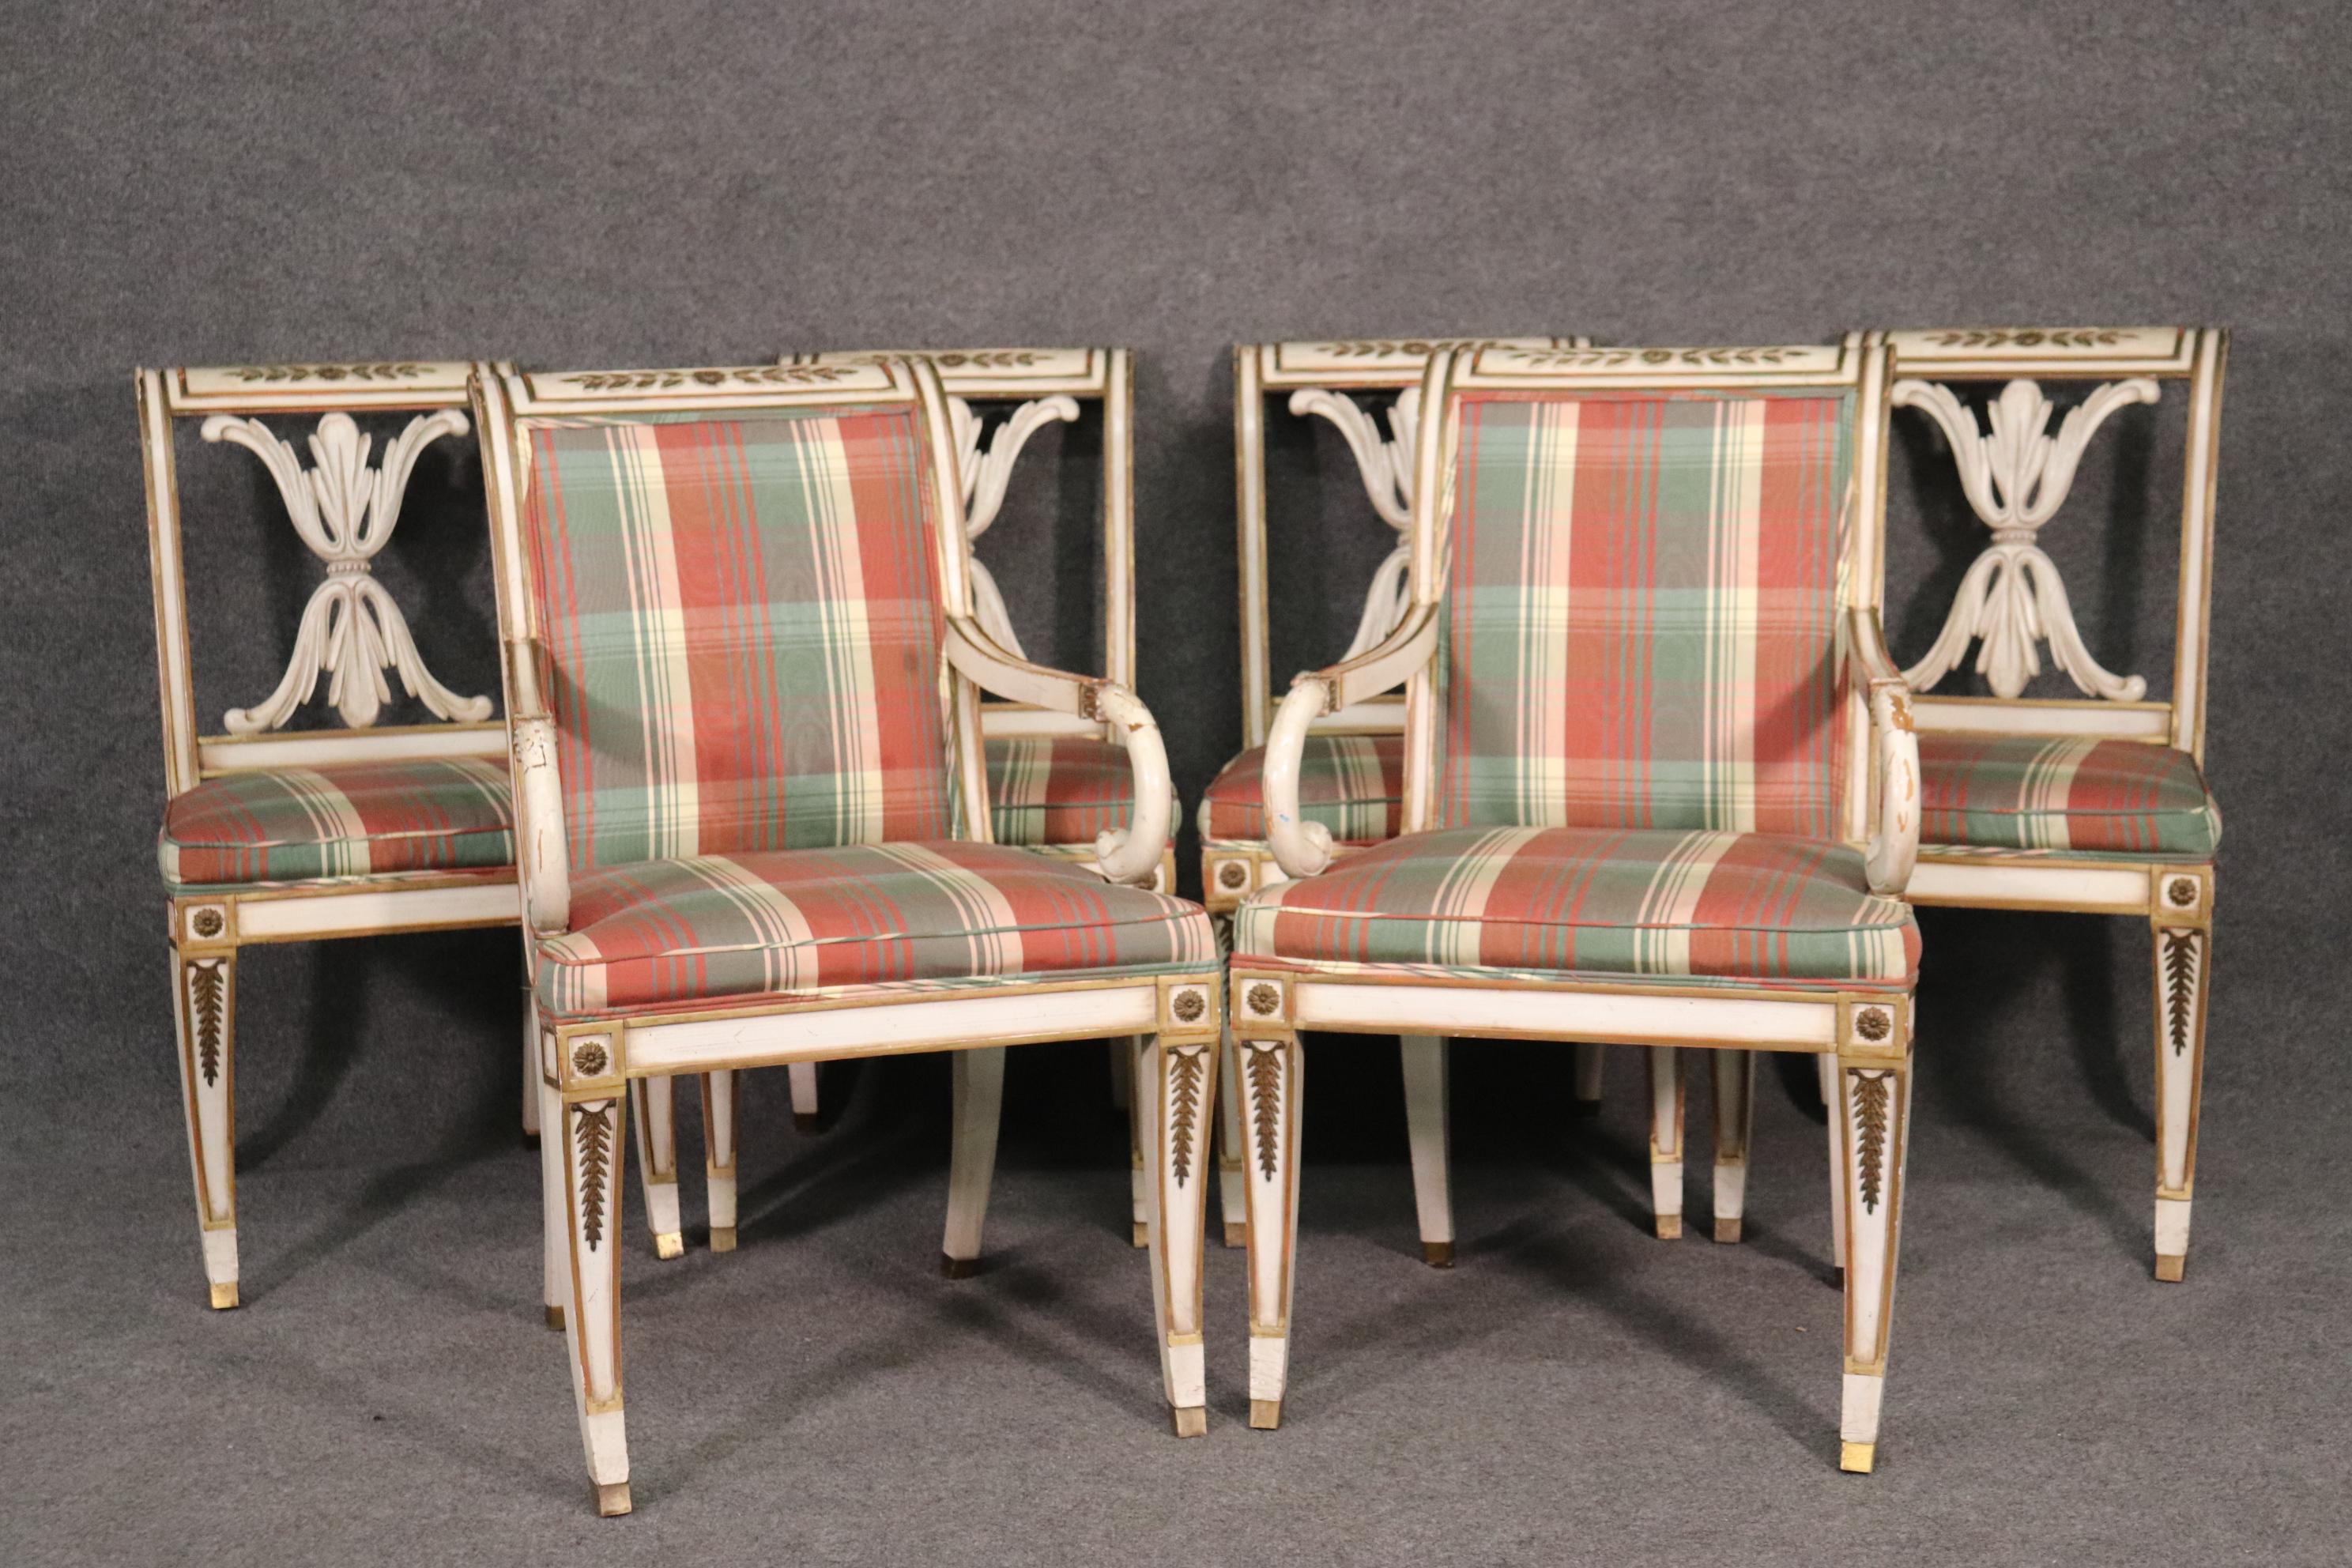 This is a nice set of antique white French Empire style chairs in original condition and having bronze mounts and nice looking upholstery. The chairs measure 36 tall x 22 wide x 25 deep x 19 inches for the seat height.